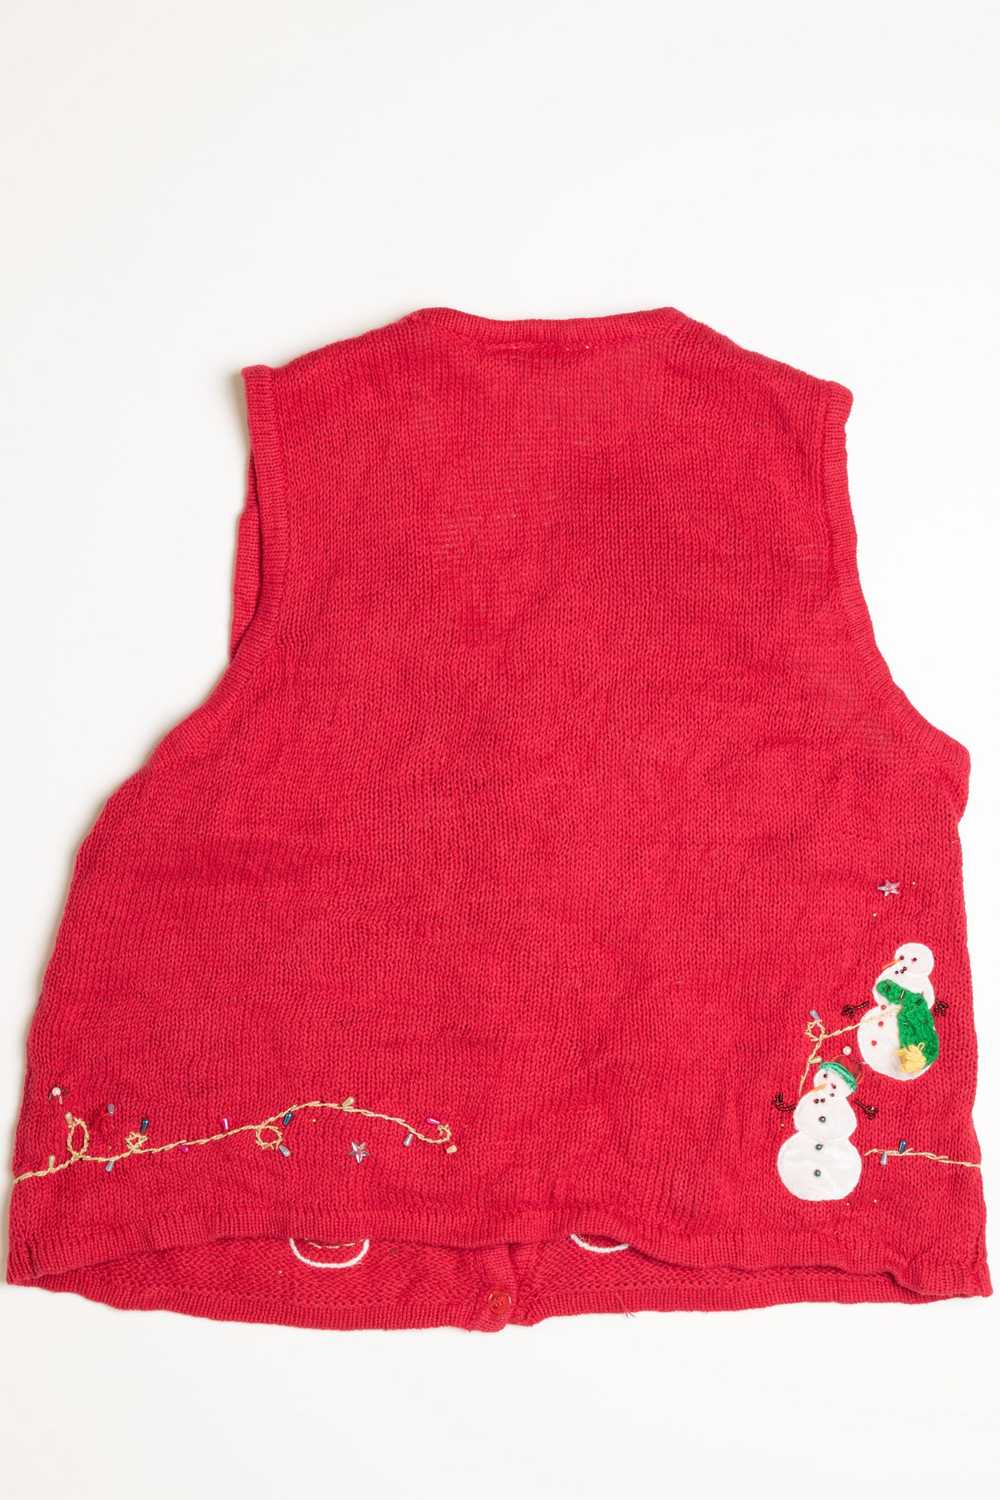 Ugly Christmas Sweater Vest 51 - image 1